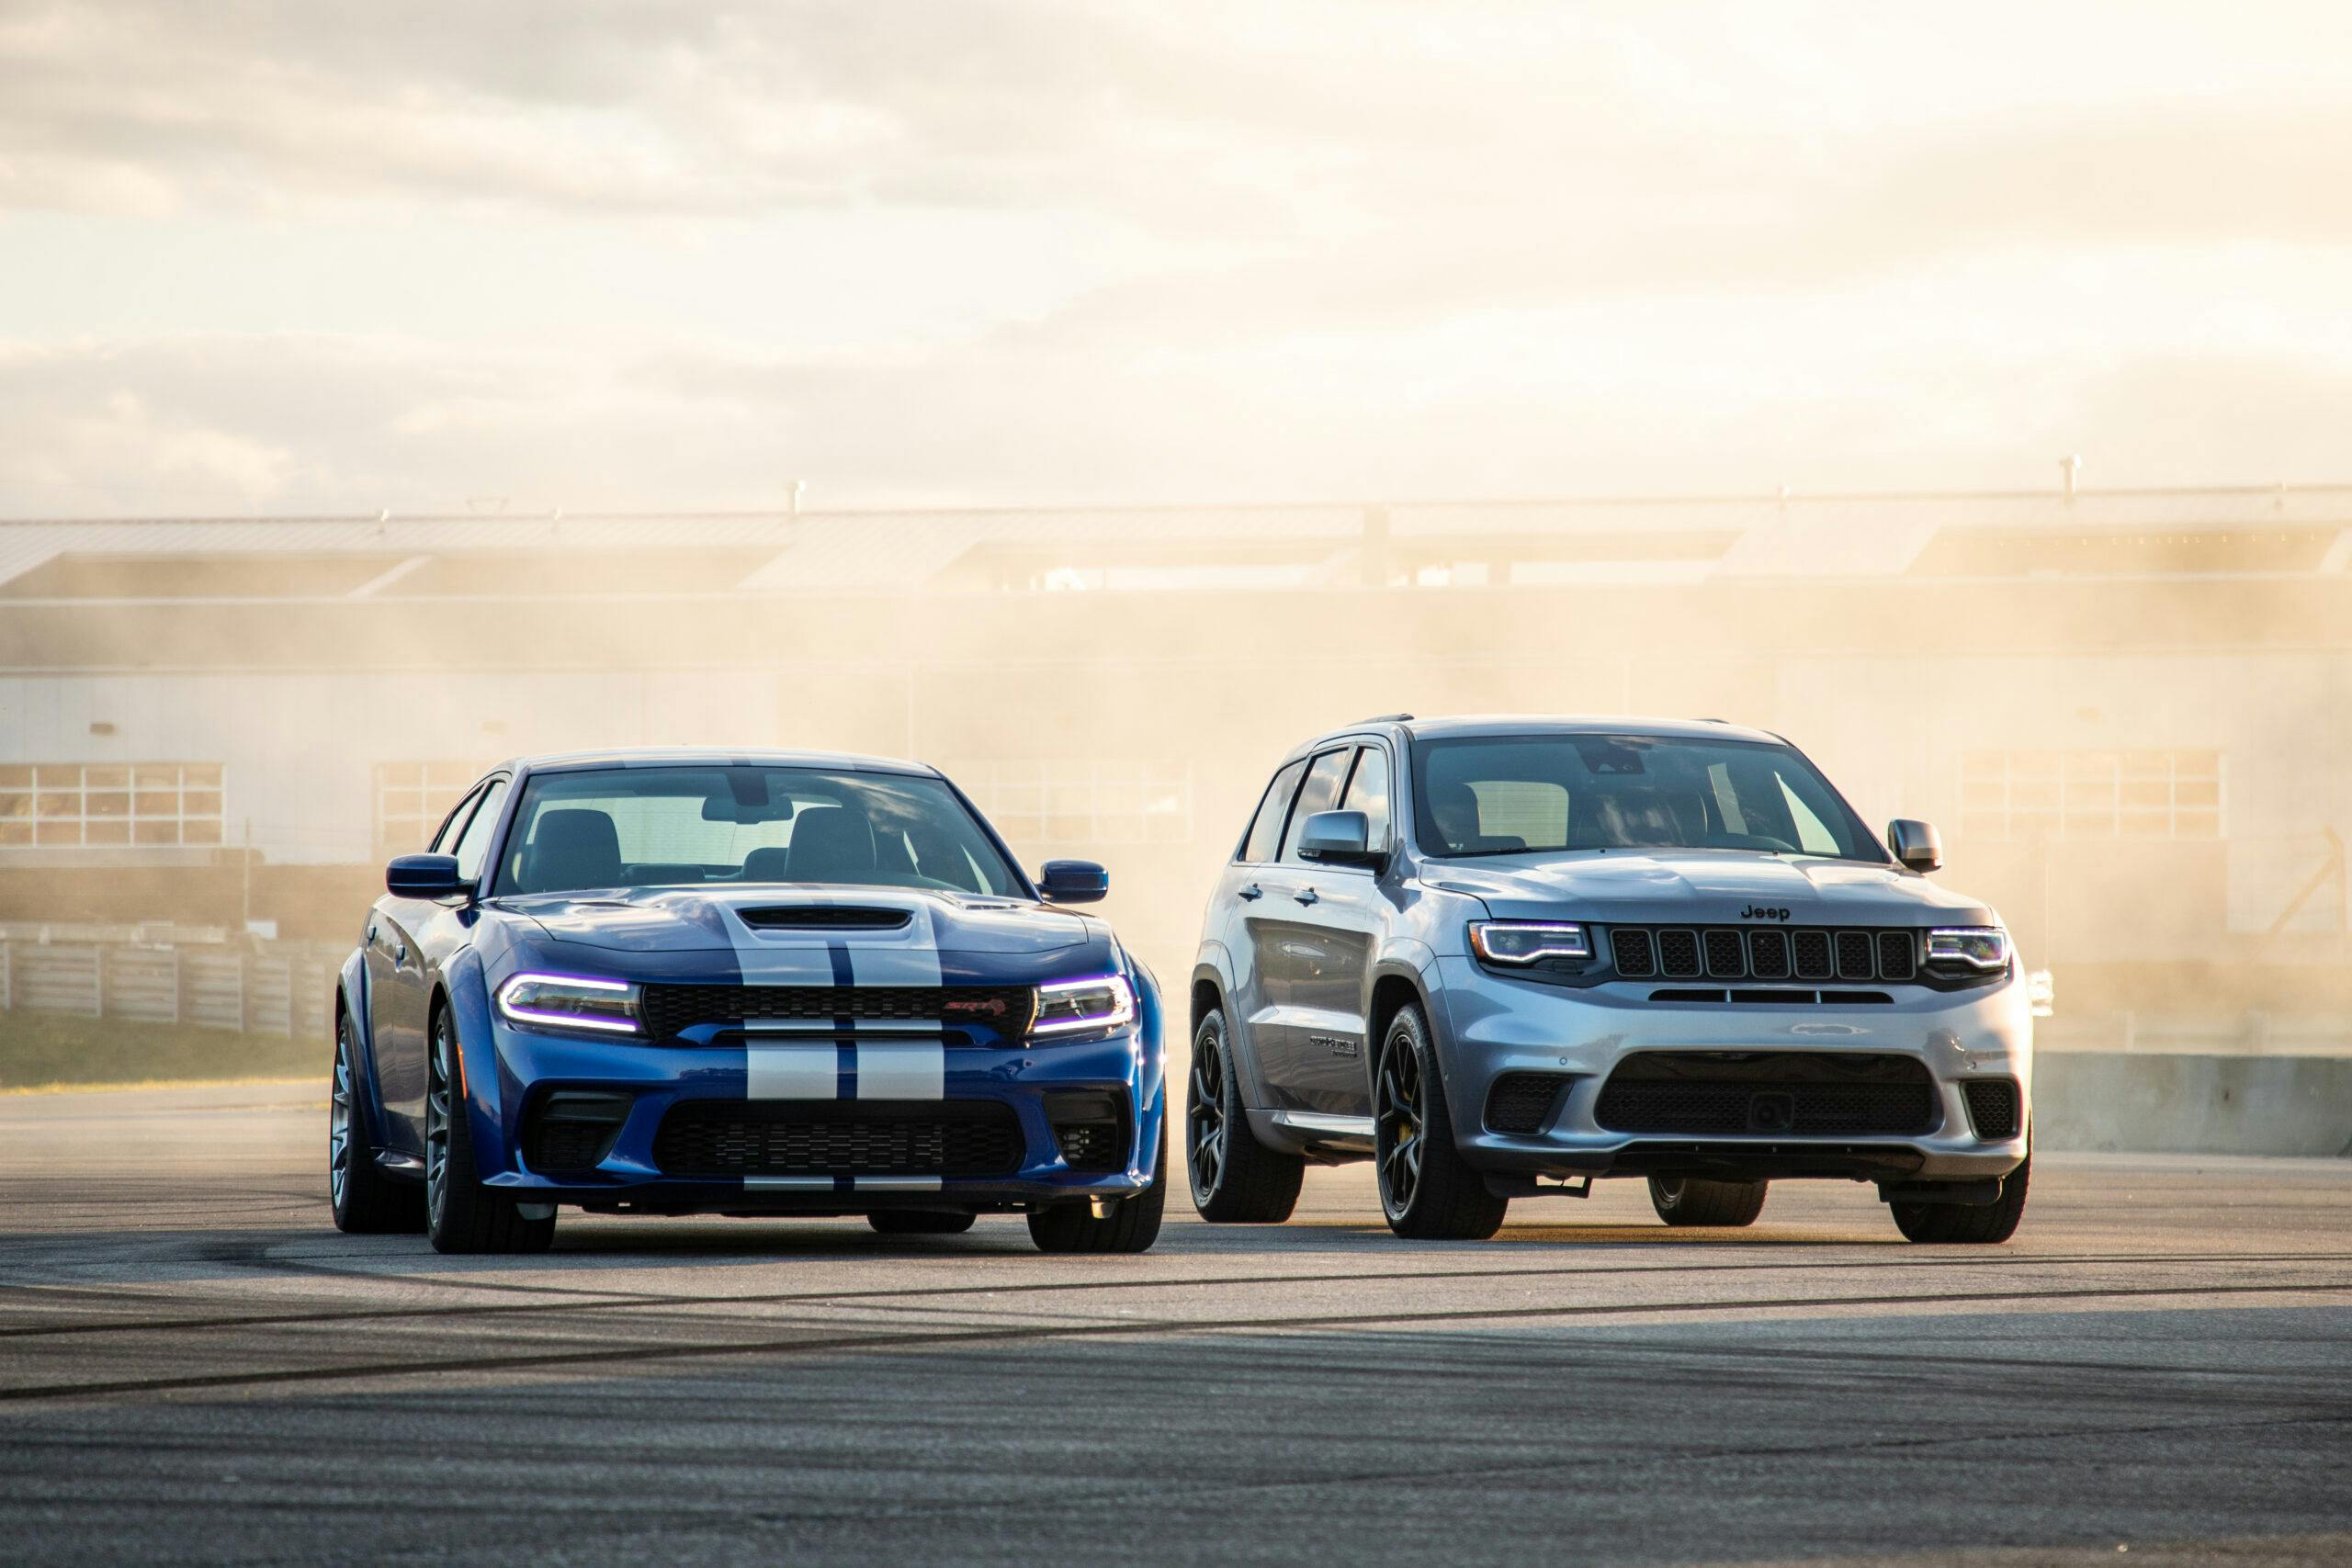 Hellcat Charger and Grand Cherokee front group